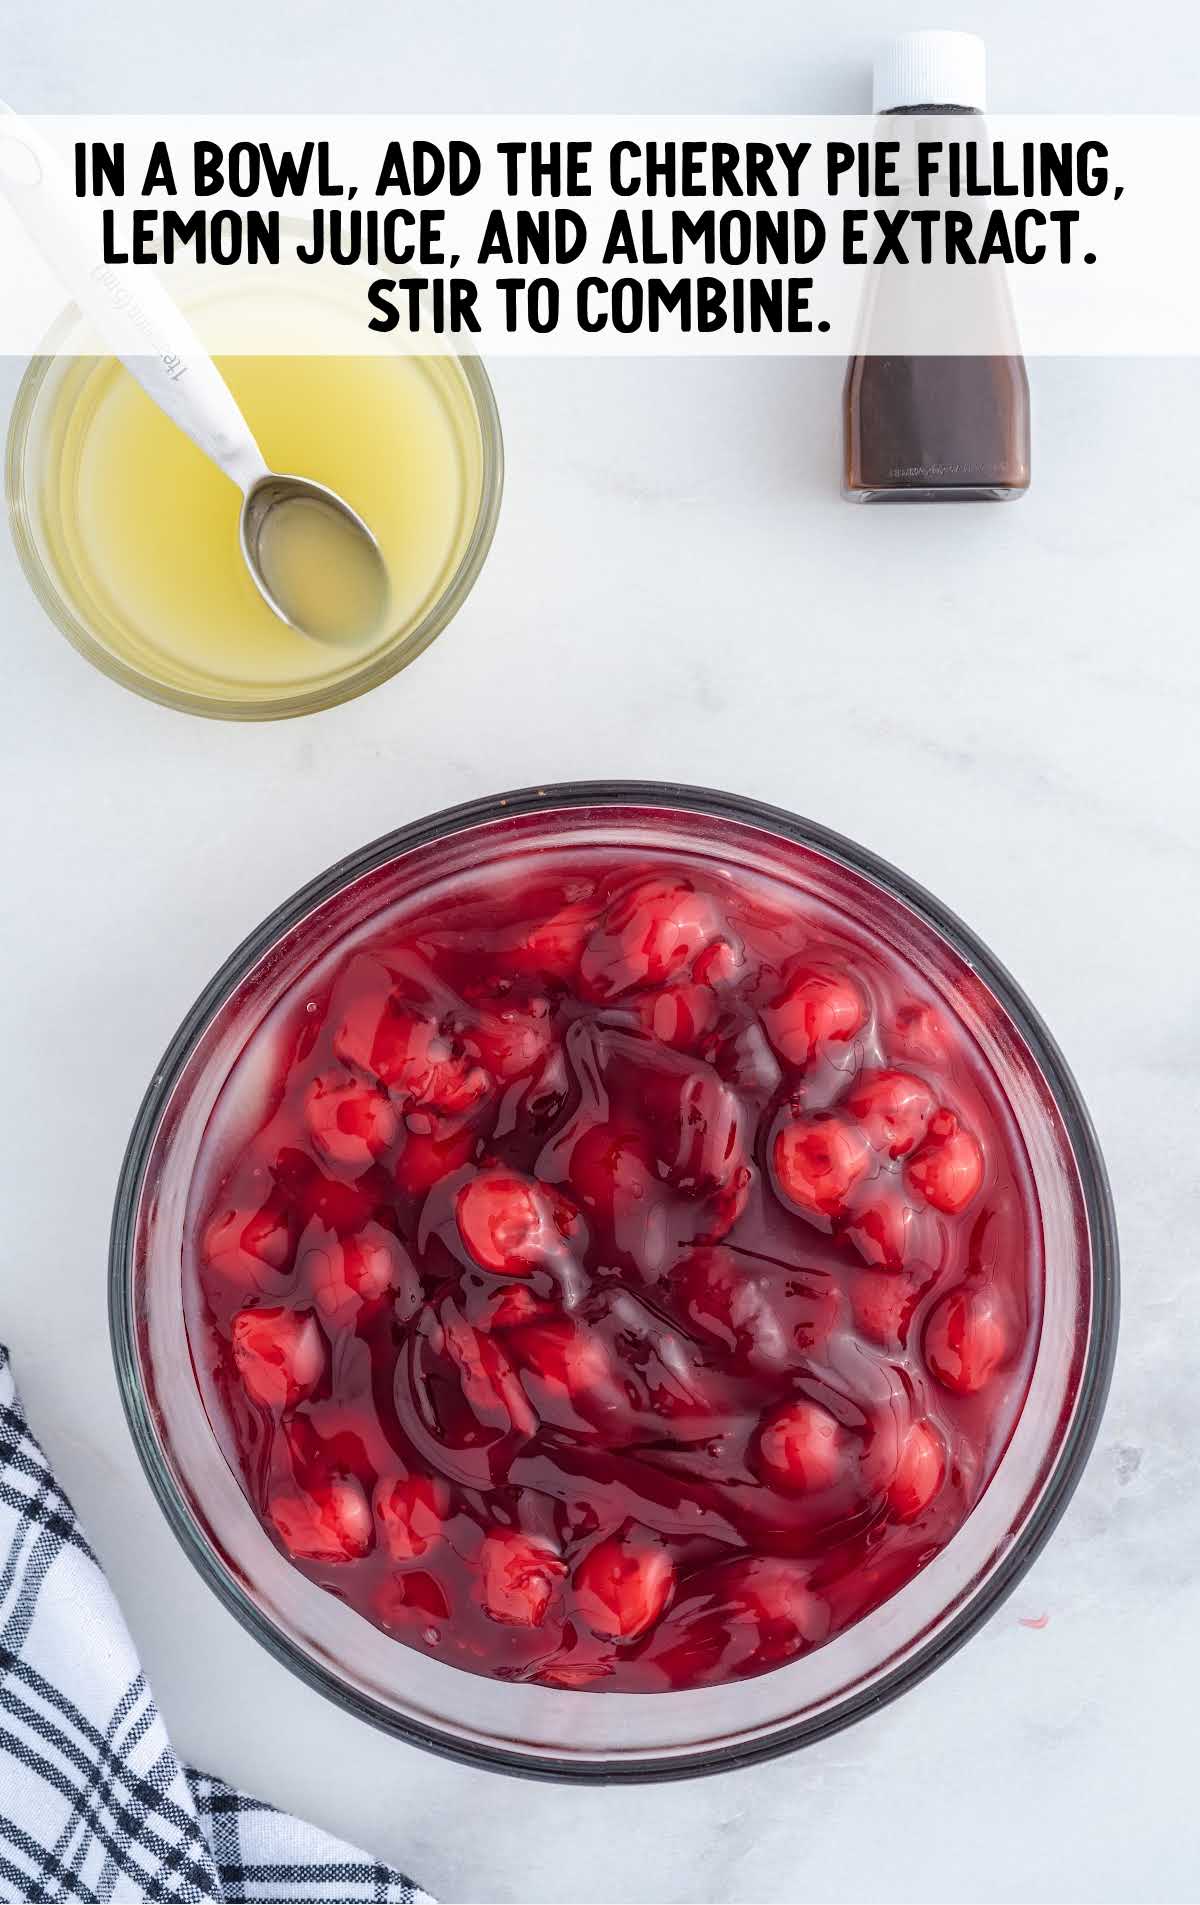 cherry pie filling, lemon juice, and almond extract combined in a bowl